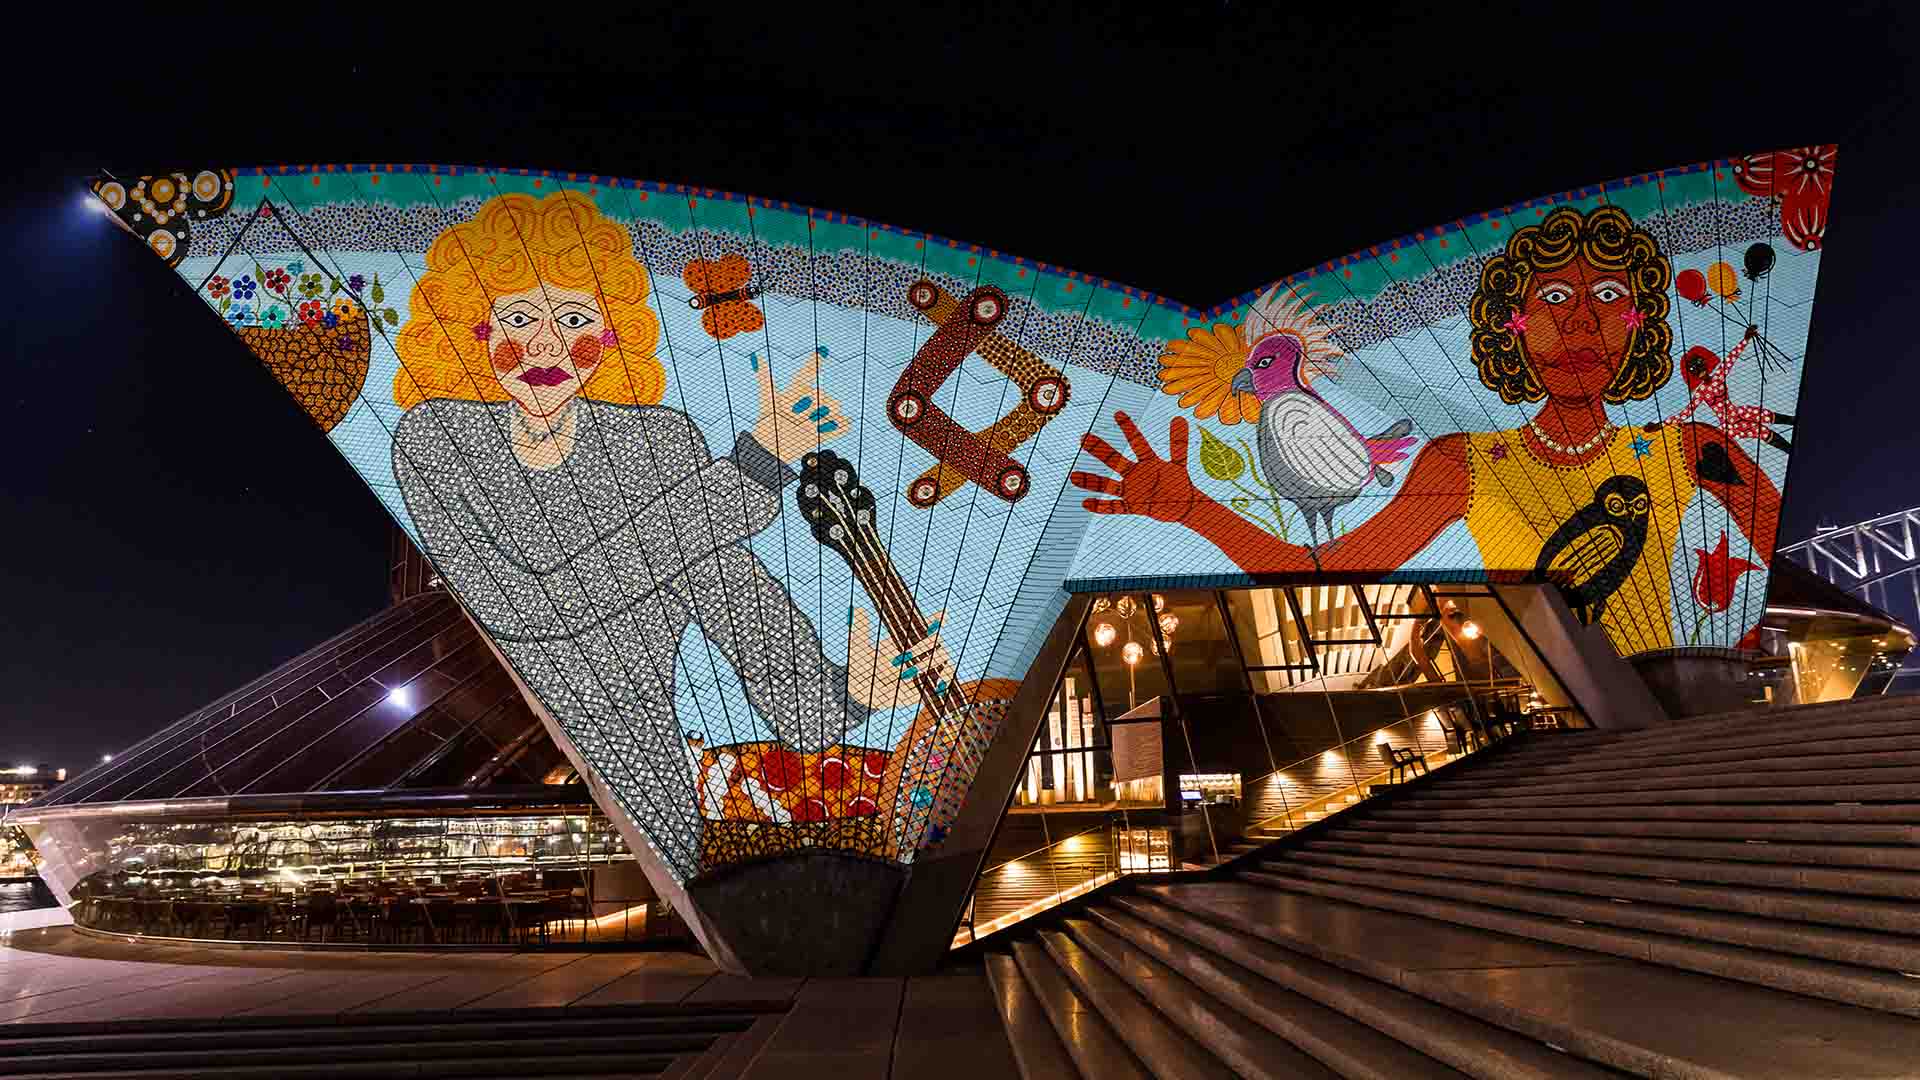 The Sydney Opera House Will Start Lighting Up Its Sails Nightly Again with First Nations Art